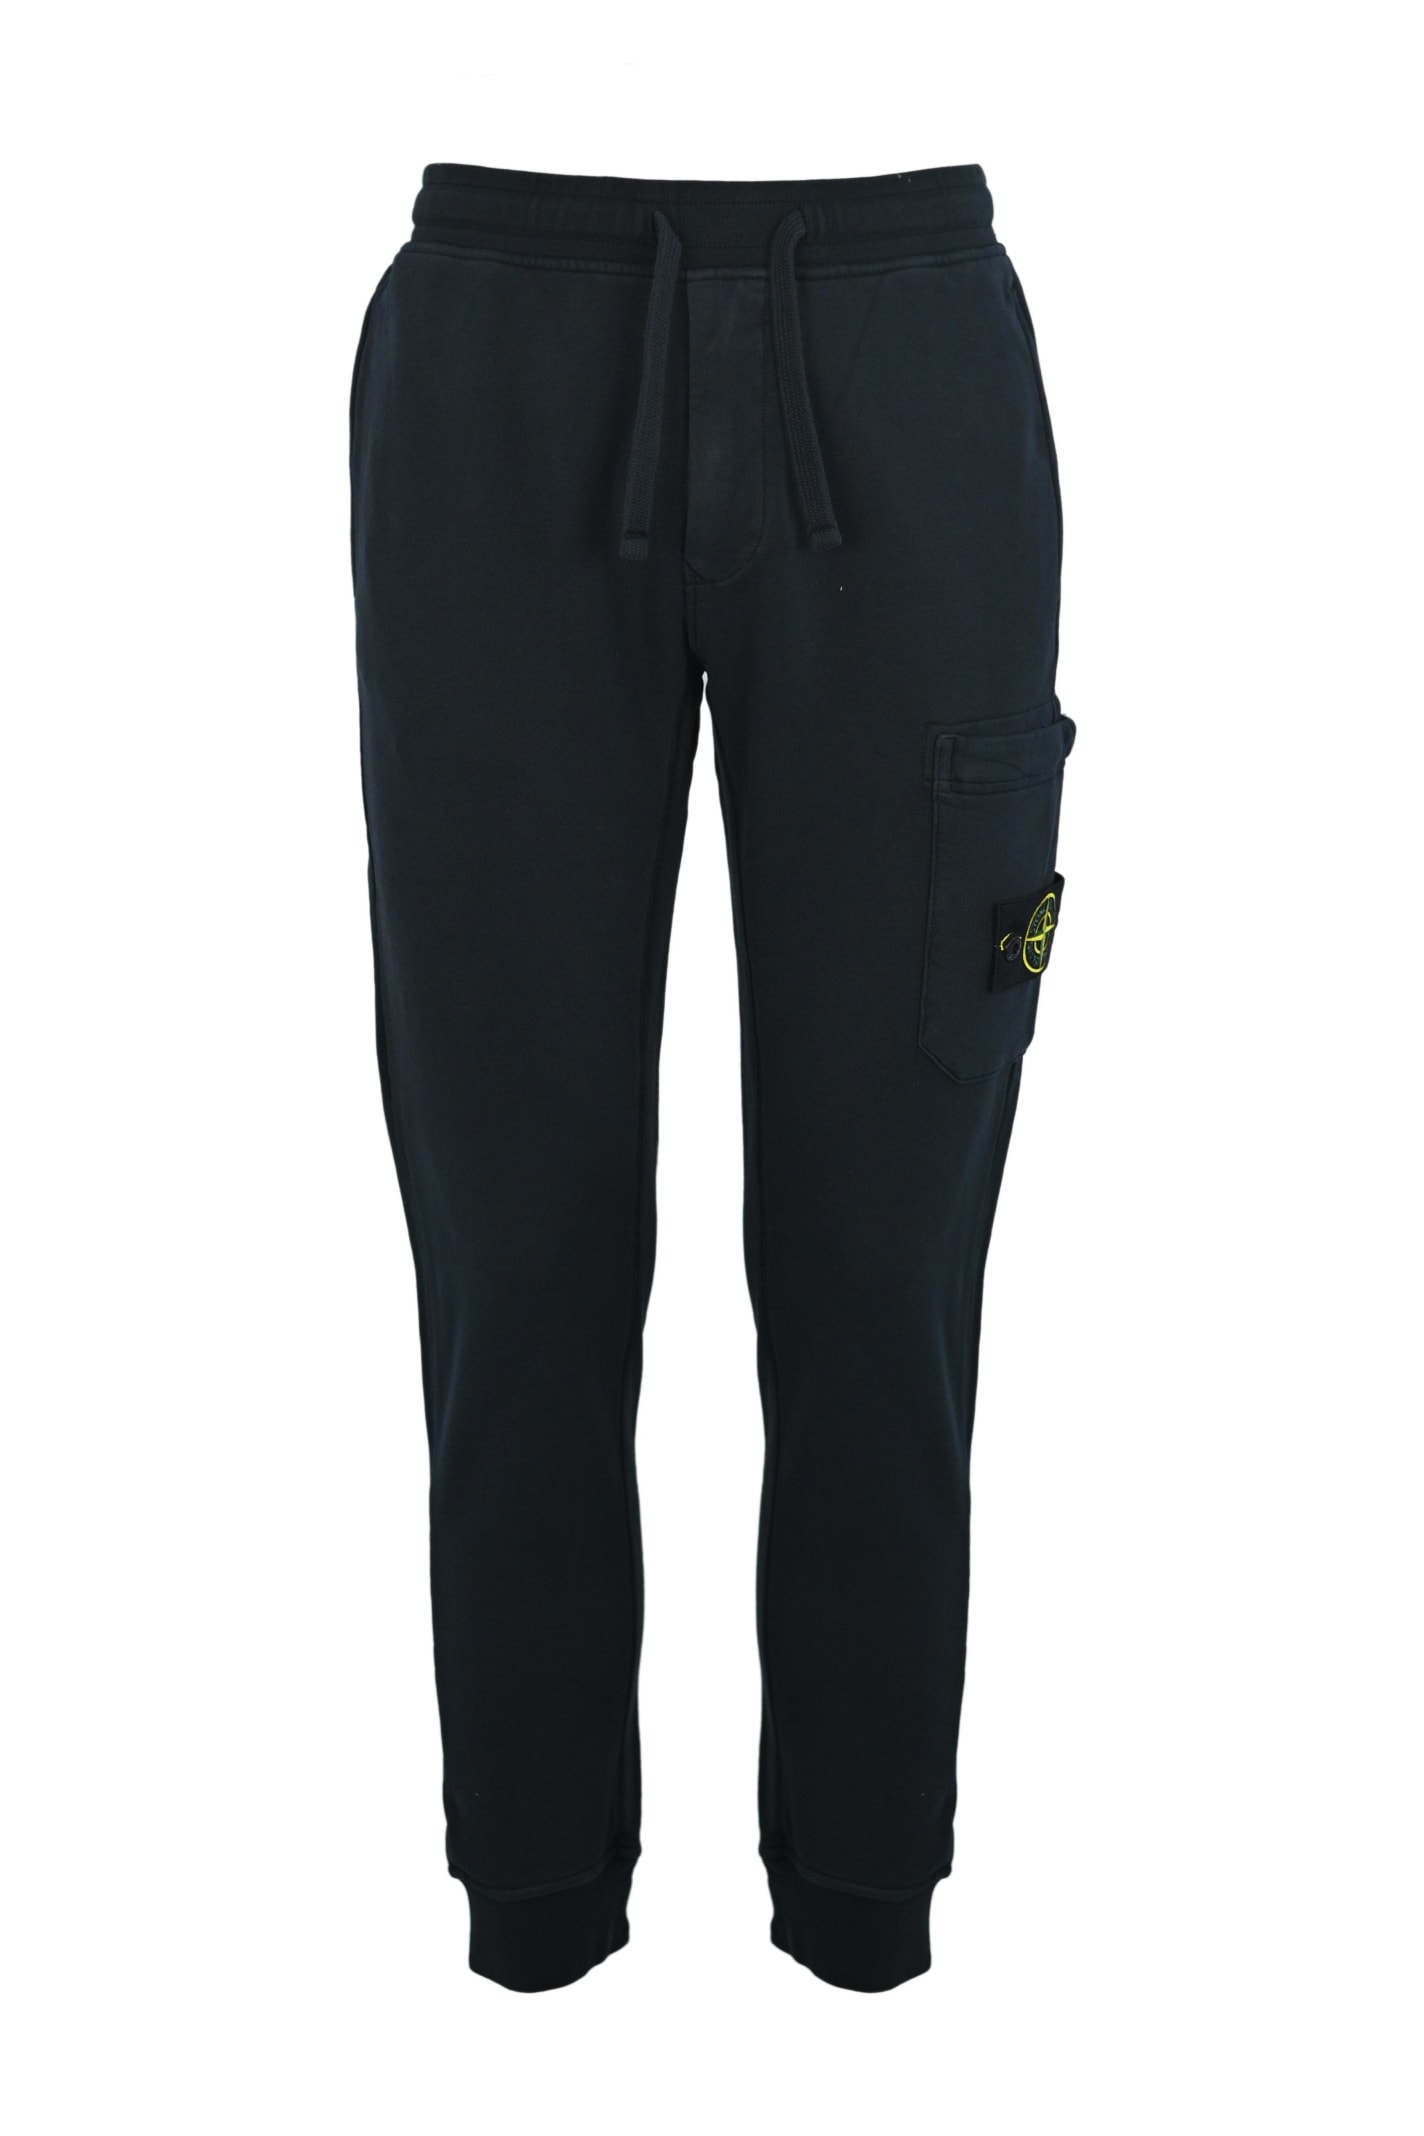 Stone Island Sports Trousers 64551 In Navy Blue